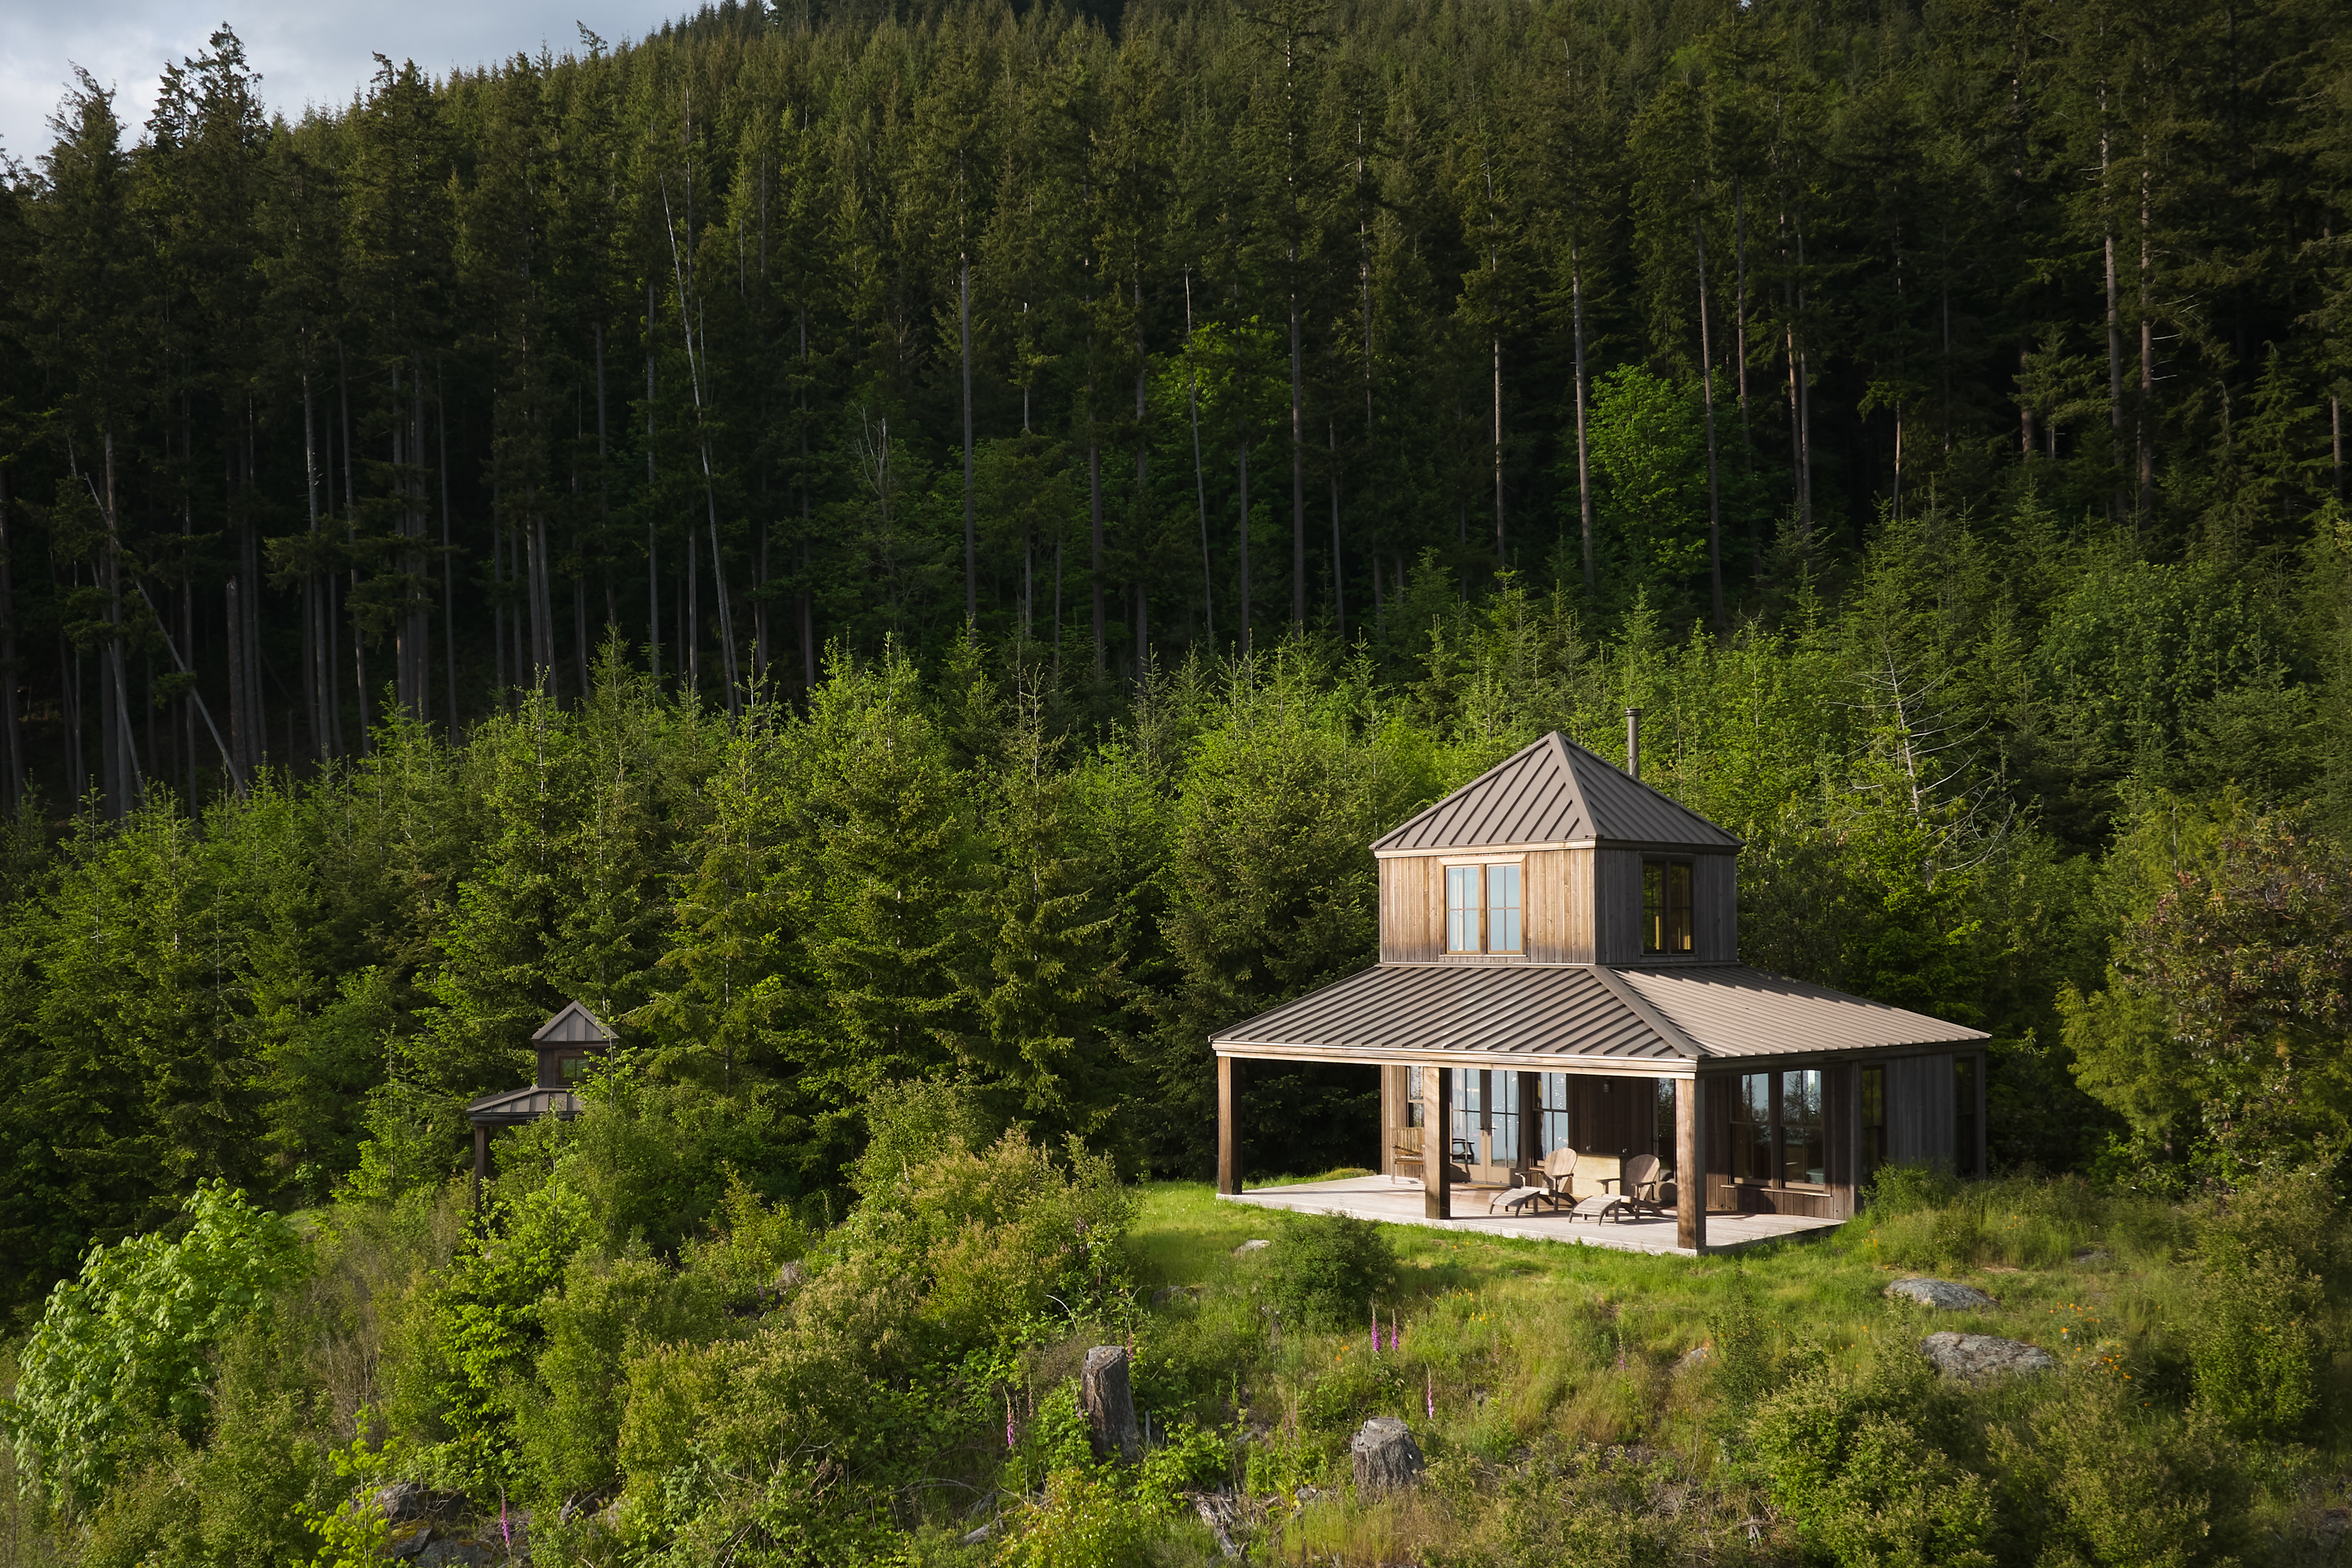 An Artist Studio sits atop a mountain in the pacific northwest.